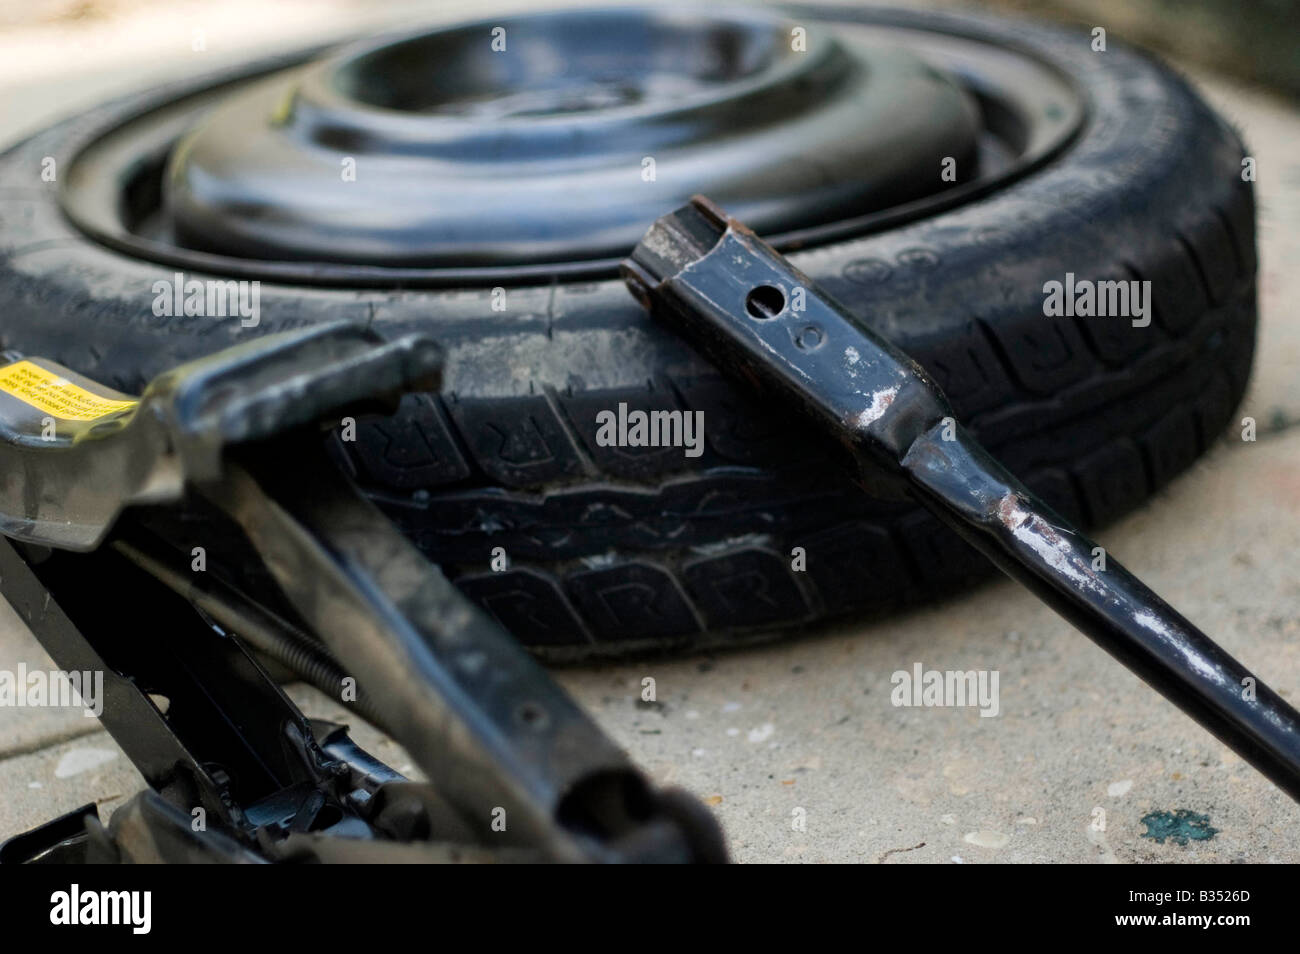 spare tire for a car, jack, and tire iron on the ground Stock Photo